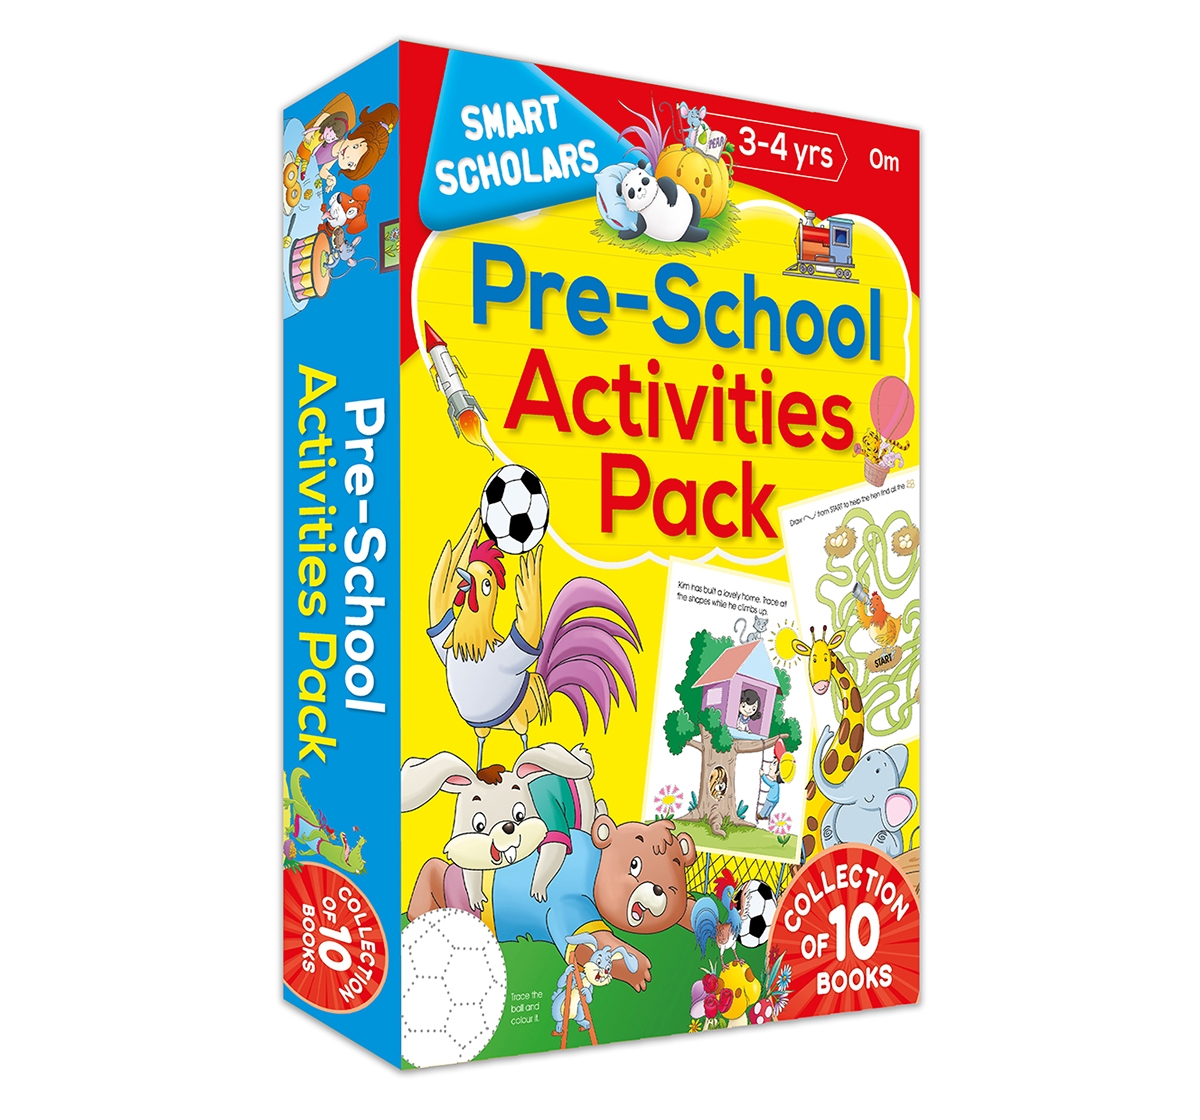 Om Kidz | Pre-School Activities Pack Smart Scholars, 320 Pages Book By Om Books Editorial Team, Paperback ( Collection Of 10 Books)